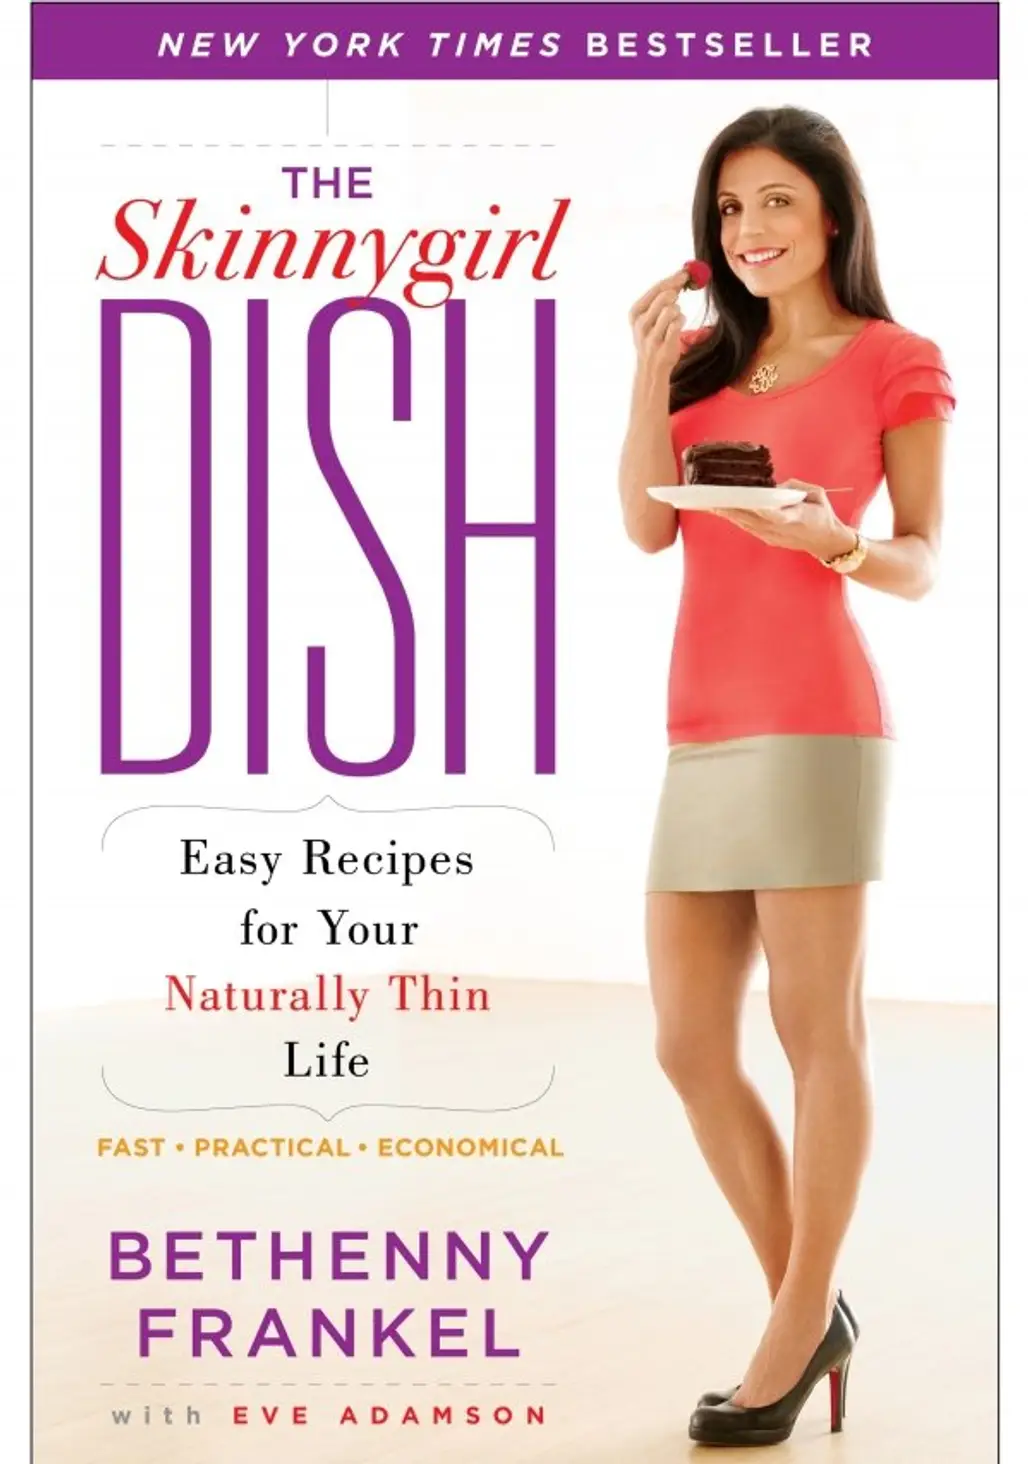 ‘the Skinnygirl Dish: Easy Recipes for Your Naturally Thin Life’ by Bethenny Frankel